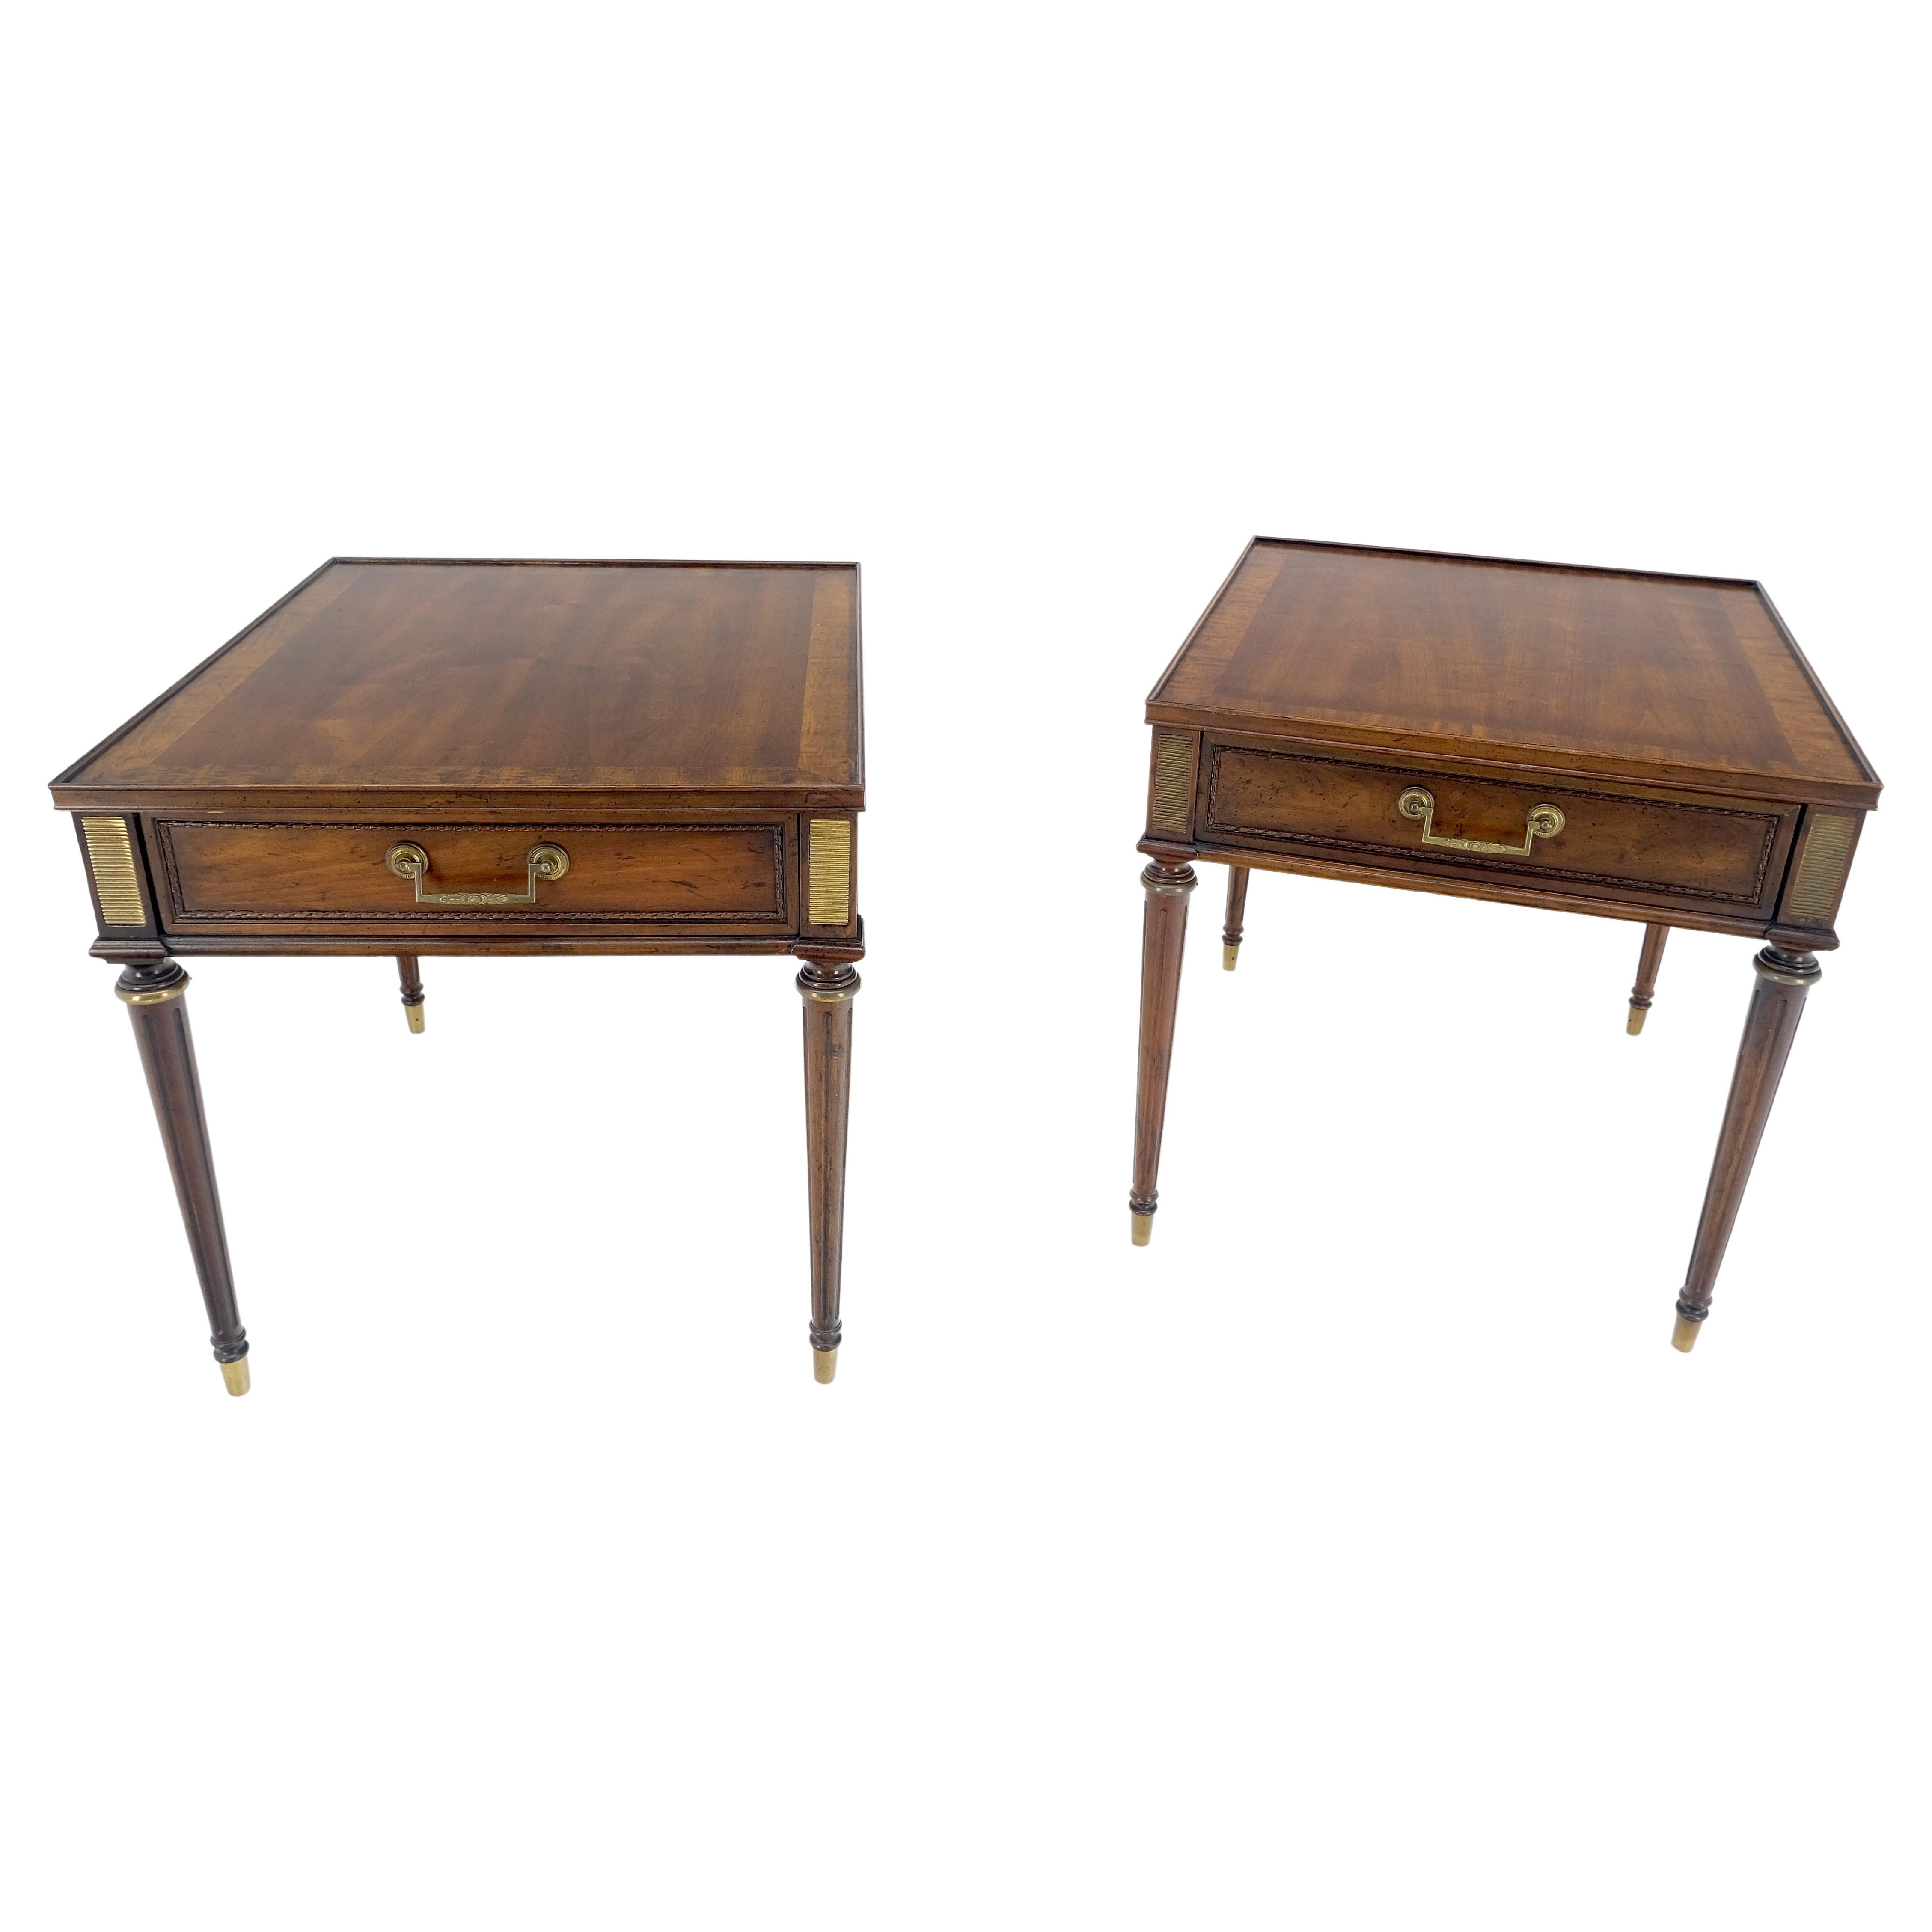 Pair Banded Top Fluted Tapered Legs One Drawer Low Profile End Tables Stands  For Sale